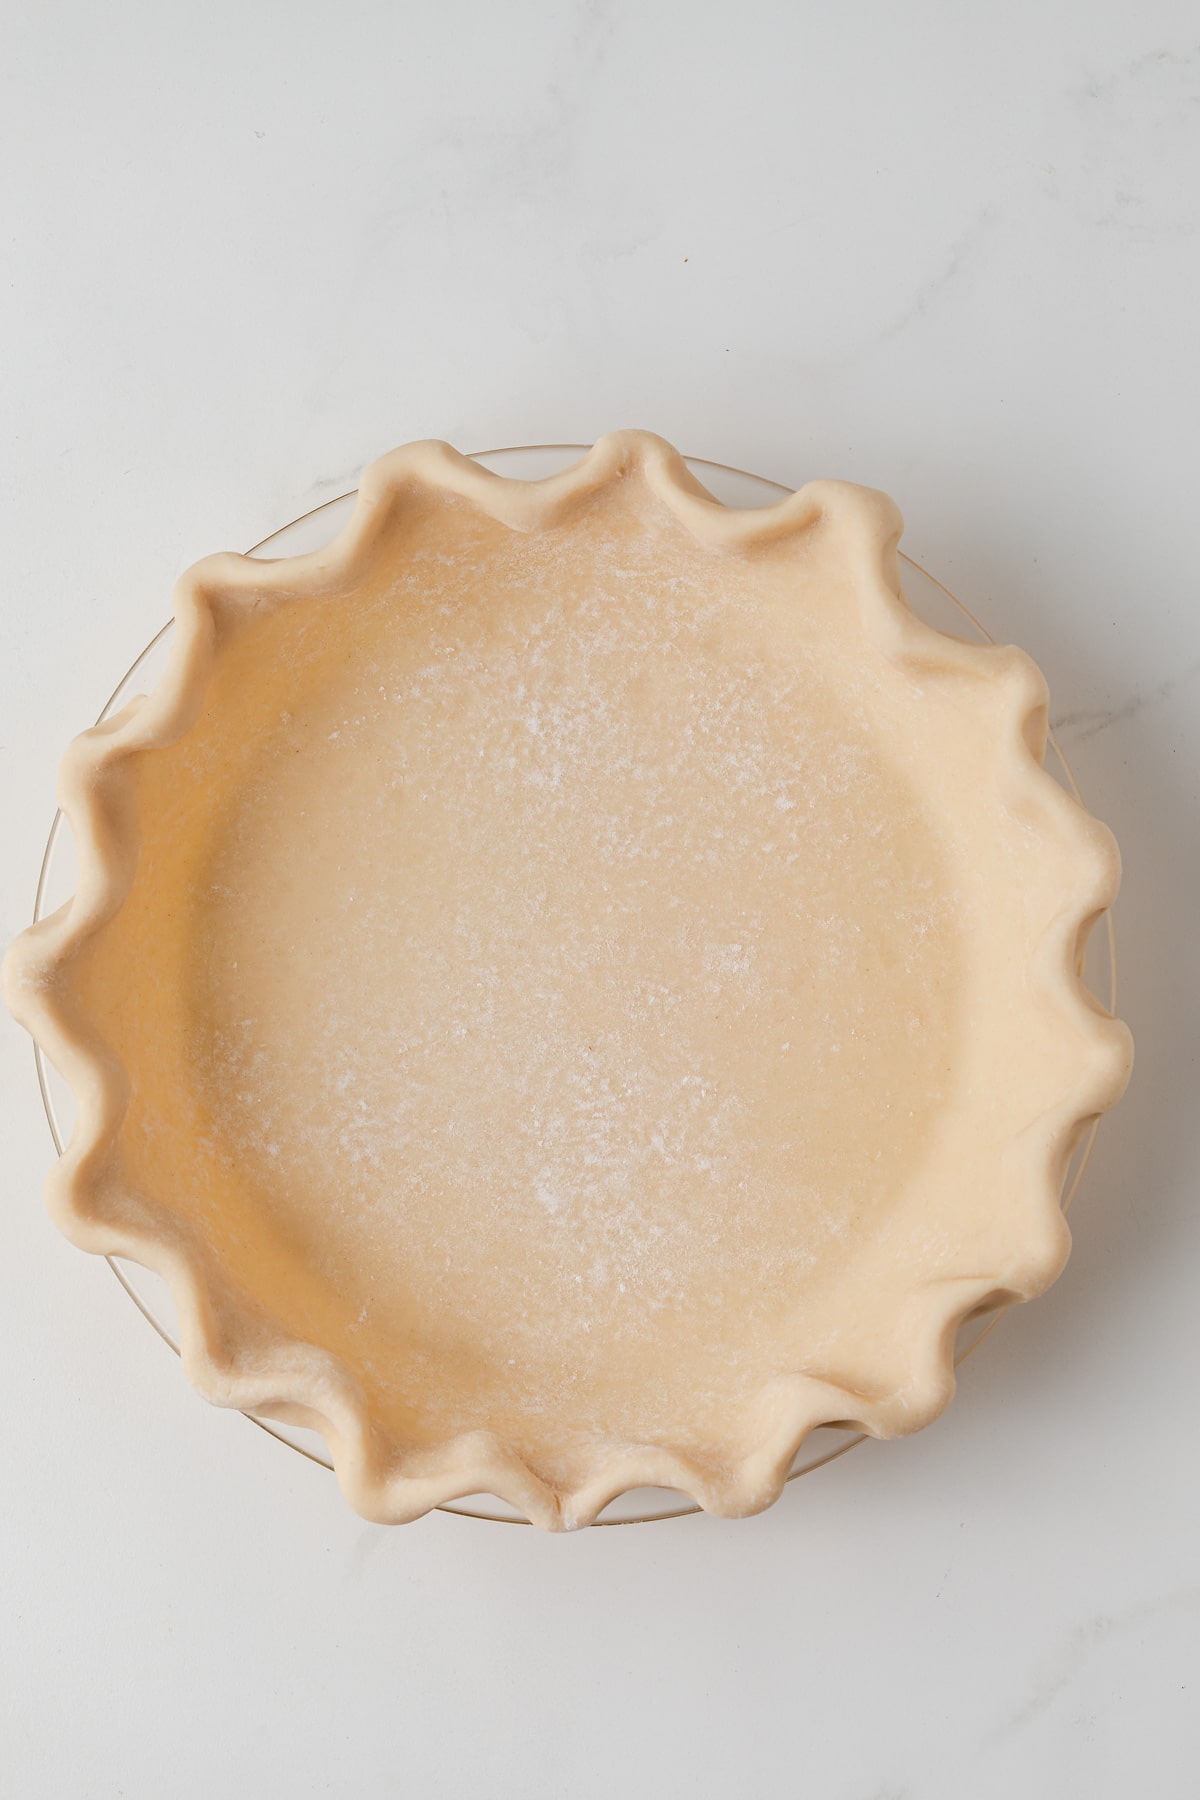 Unbaked pie shell.